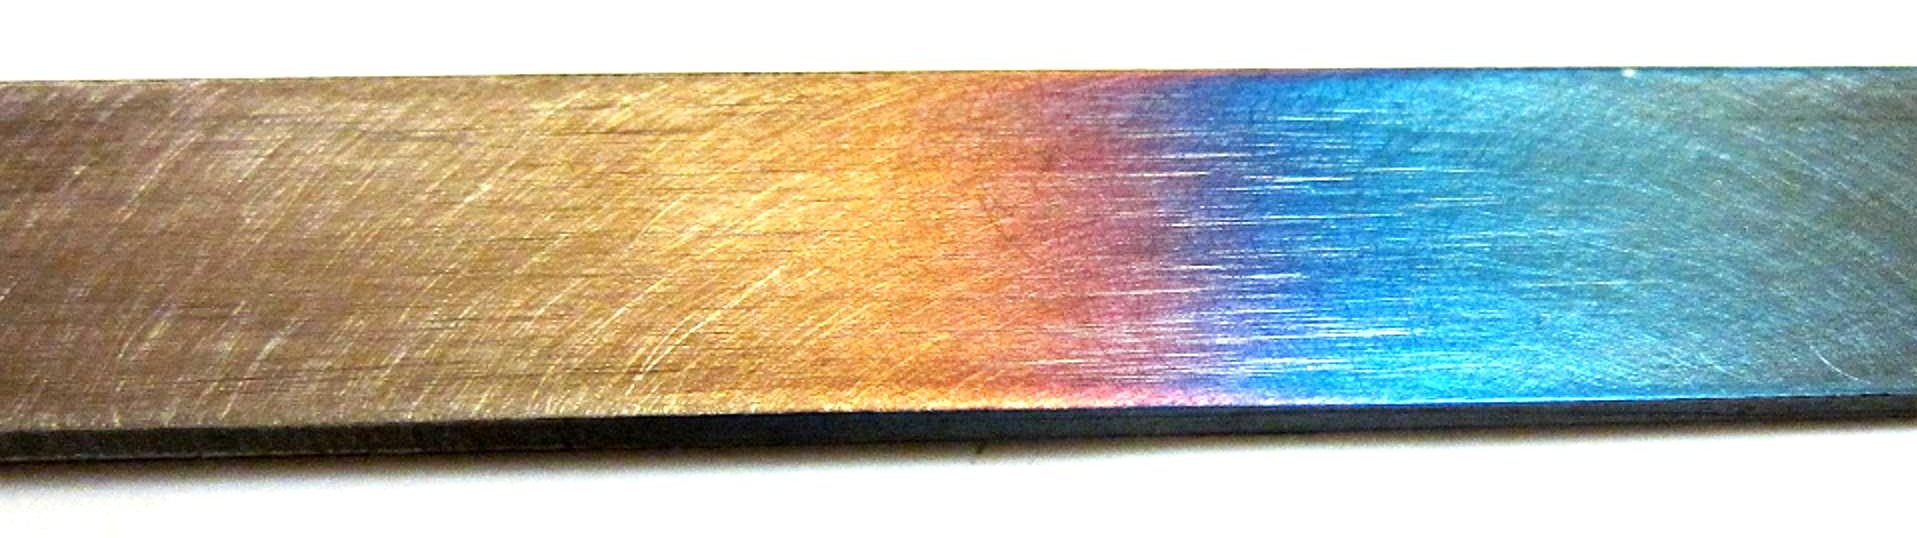 Steel tempering, various colours achieved with different tempering temperatures below the metal's lower critical point.